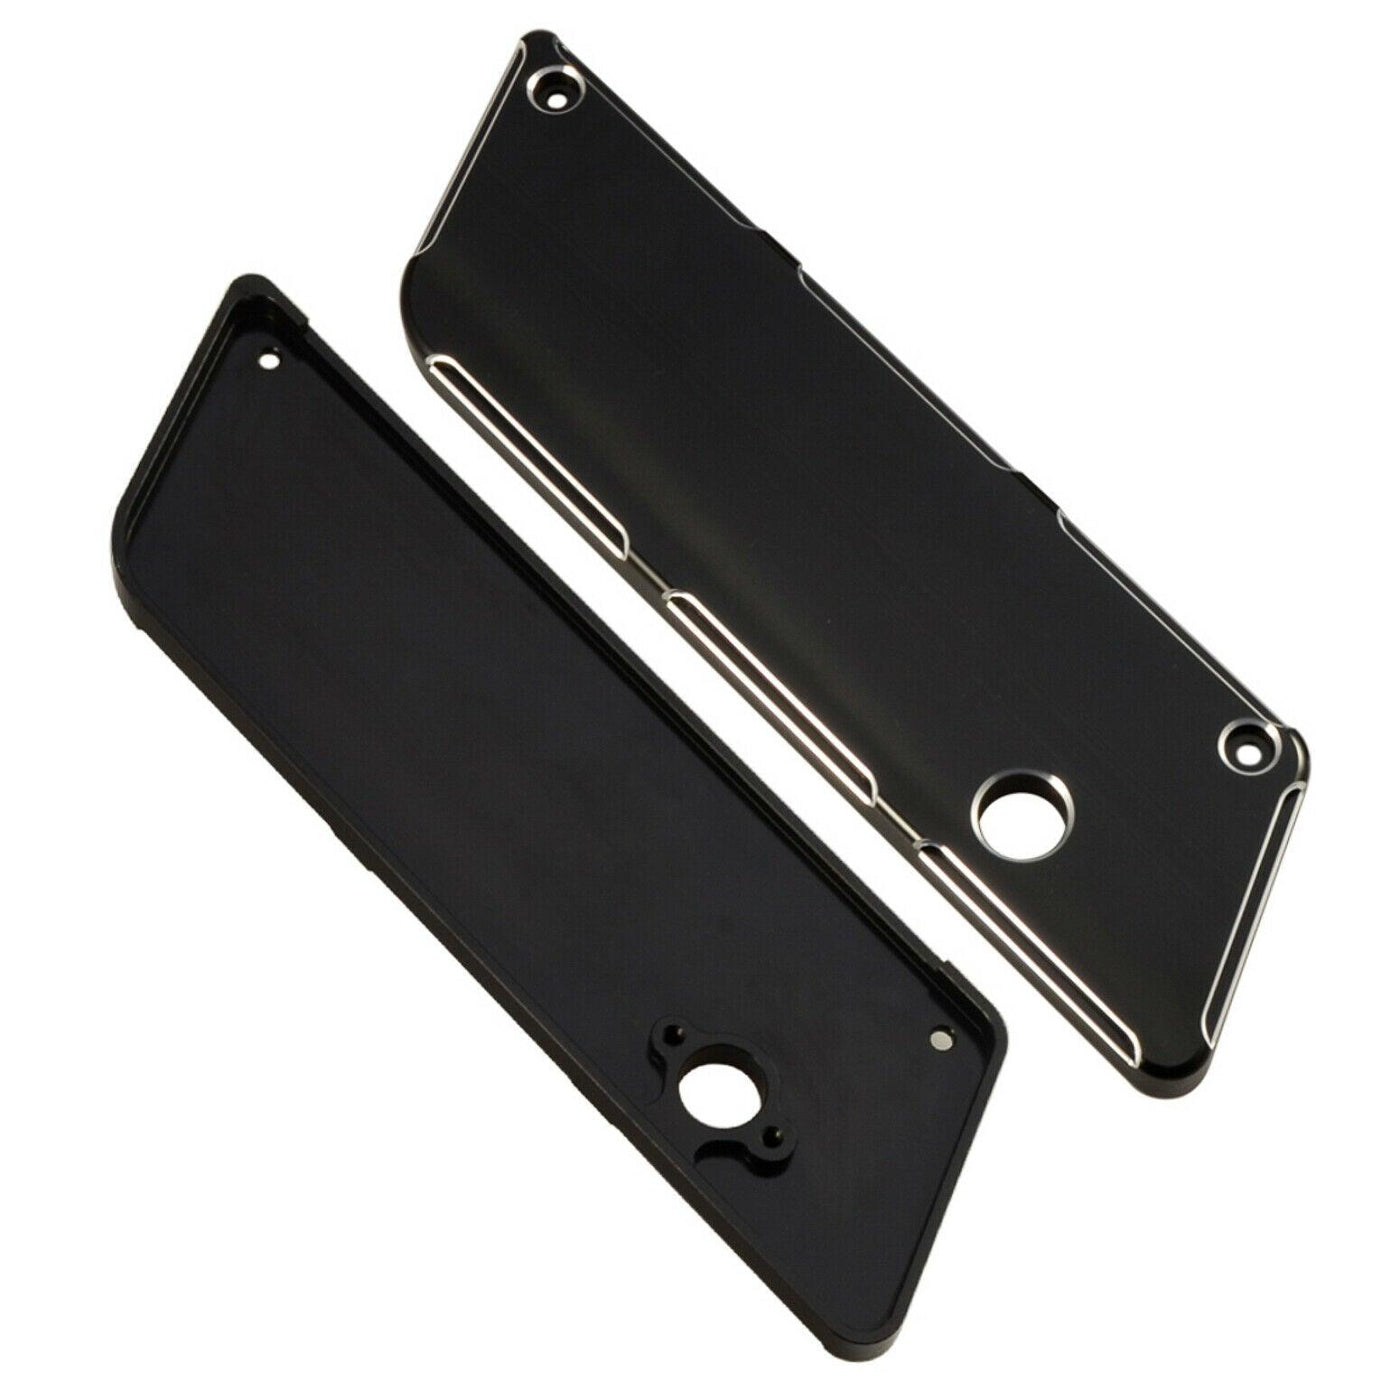 Hard Bag Saddlebag Latch Cover Fit for Harley Touring Road King Glide 1993-13 - Moto Life Products